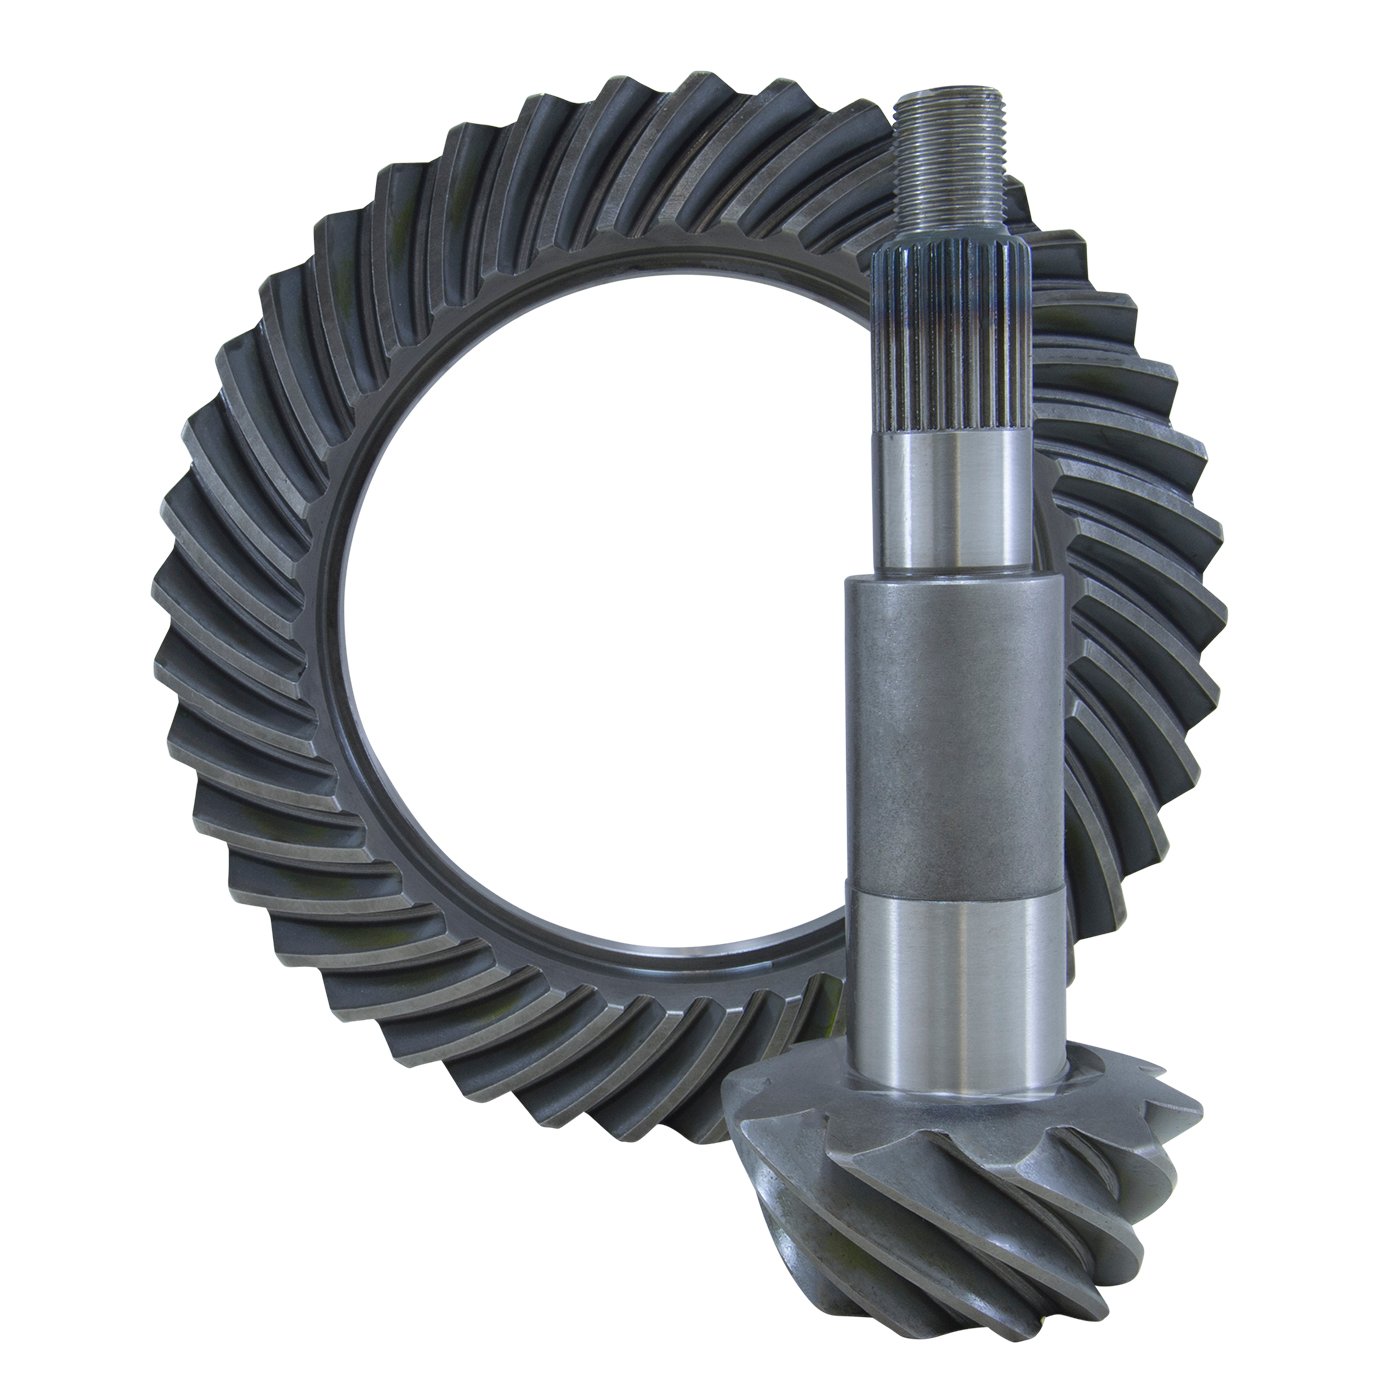 USA Standard ZG D70-456 Replacement Ring & Pinion Gear Set, For Dana 70, 4.56 Ratio